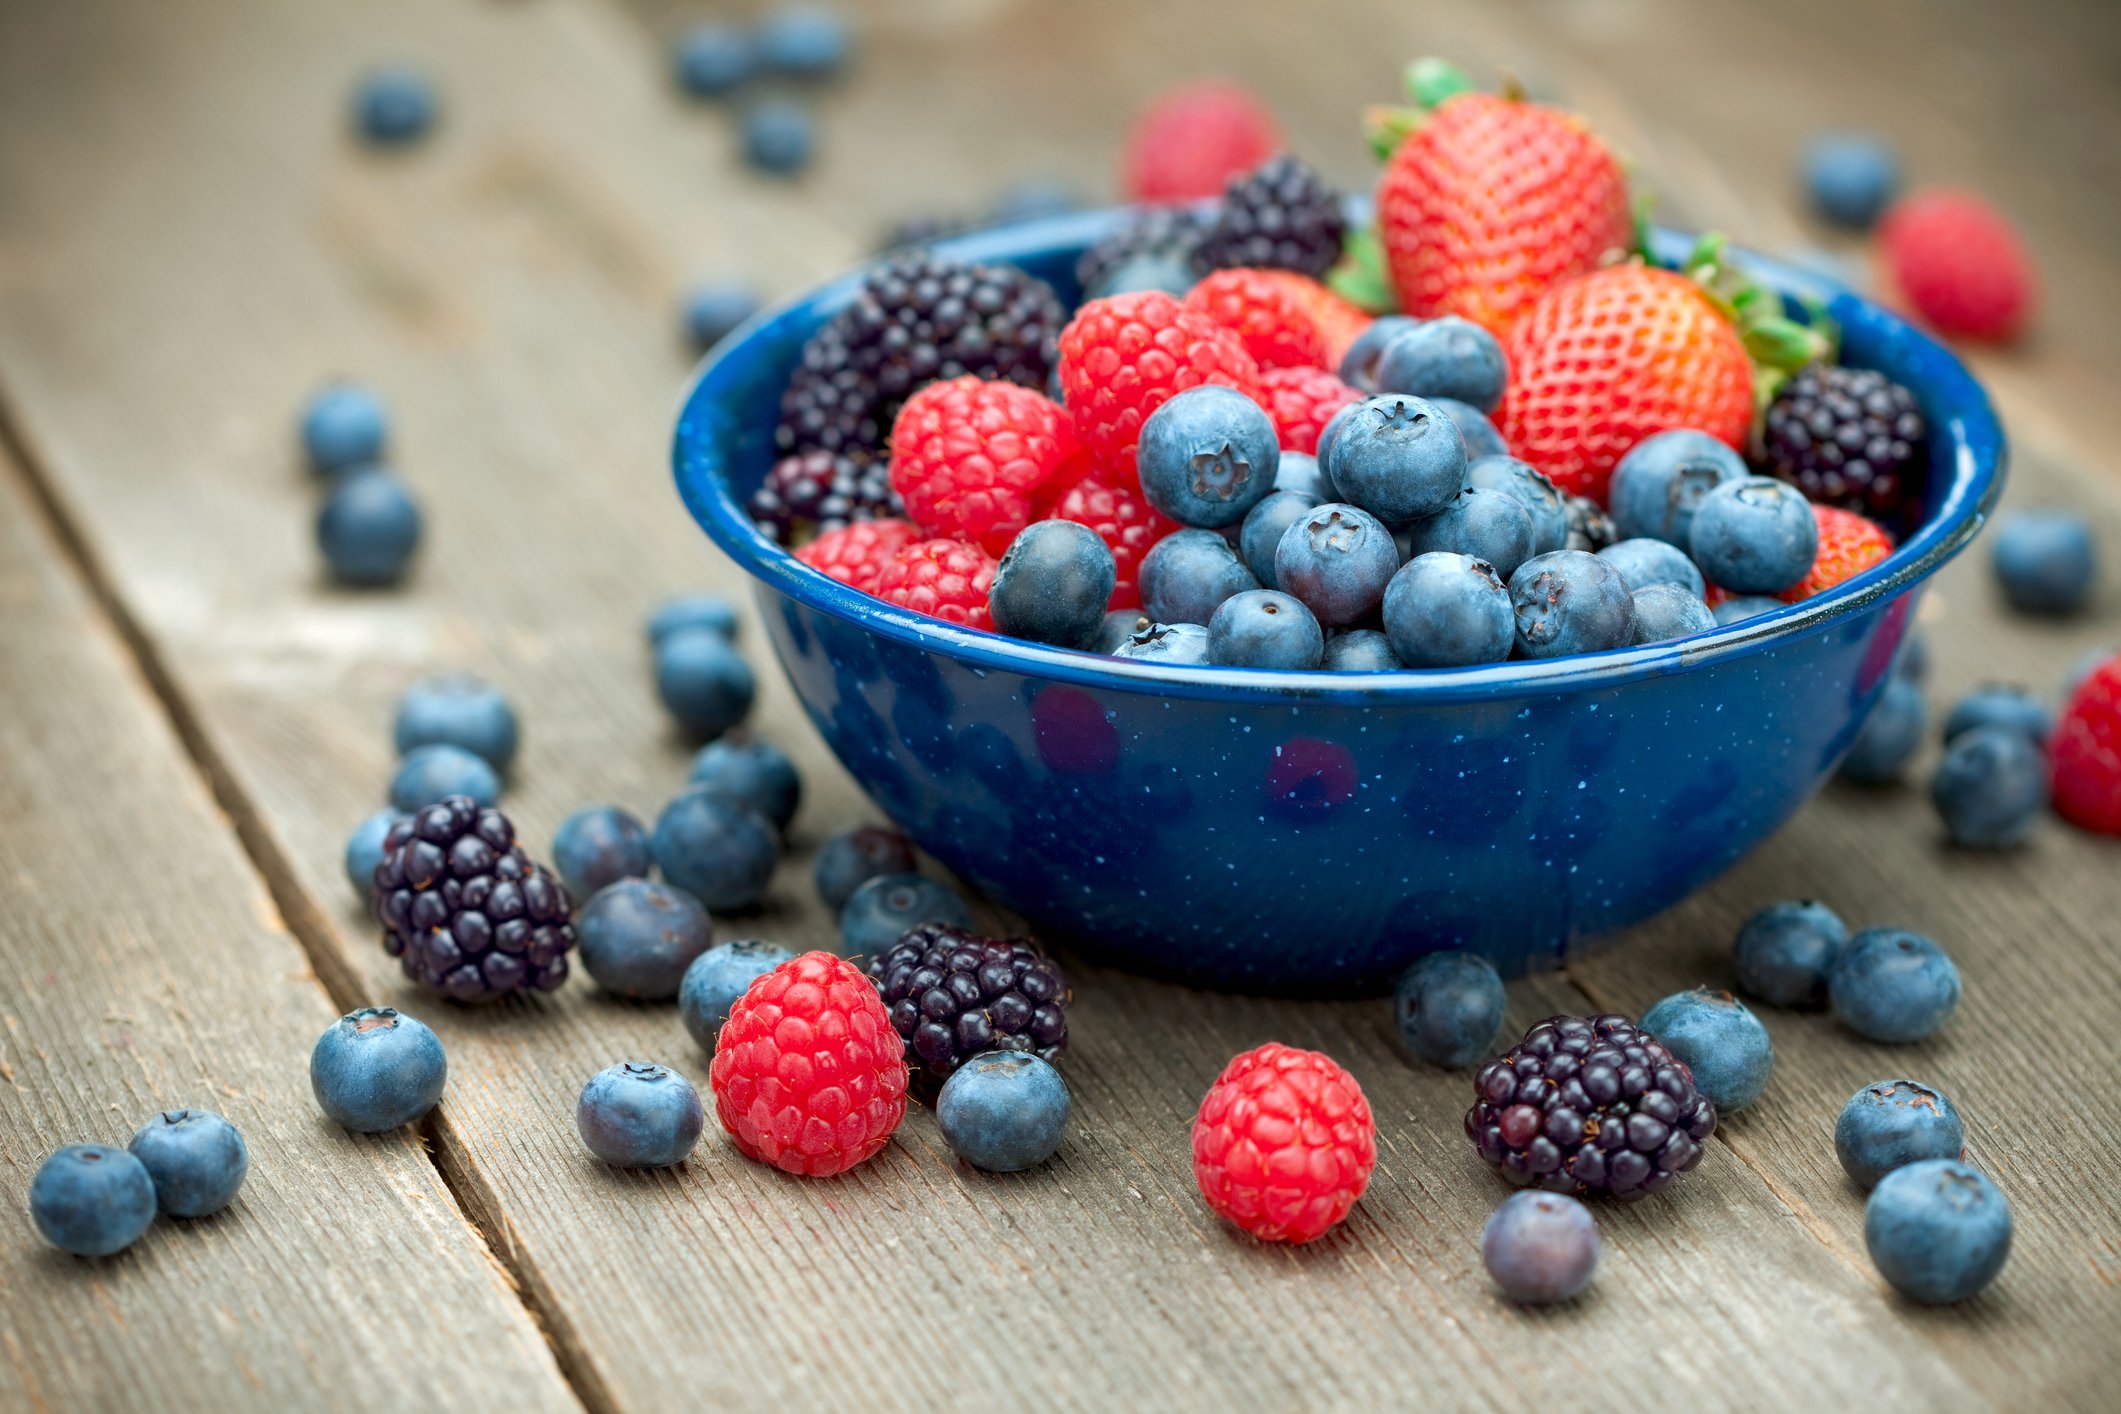 berries and cherries in a blue bowl